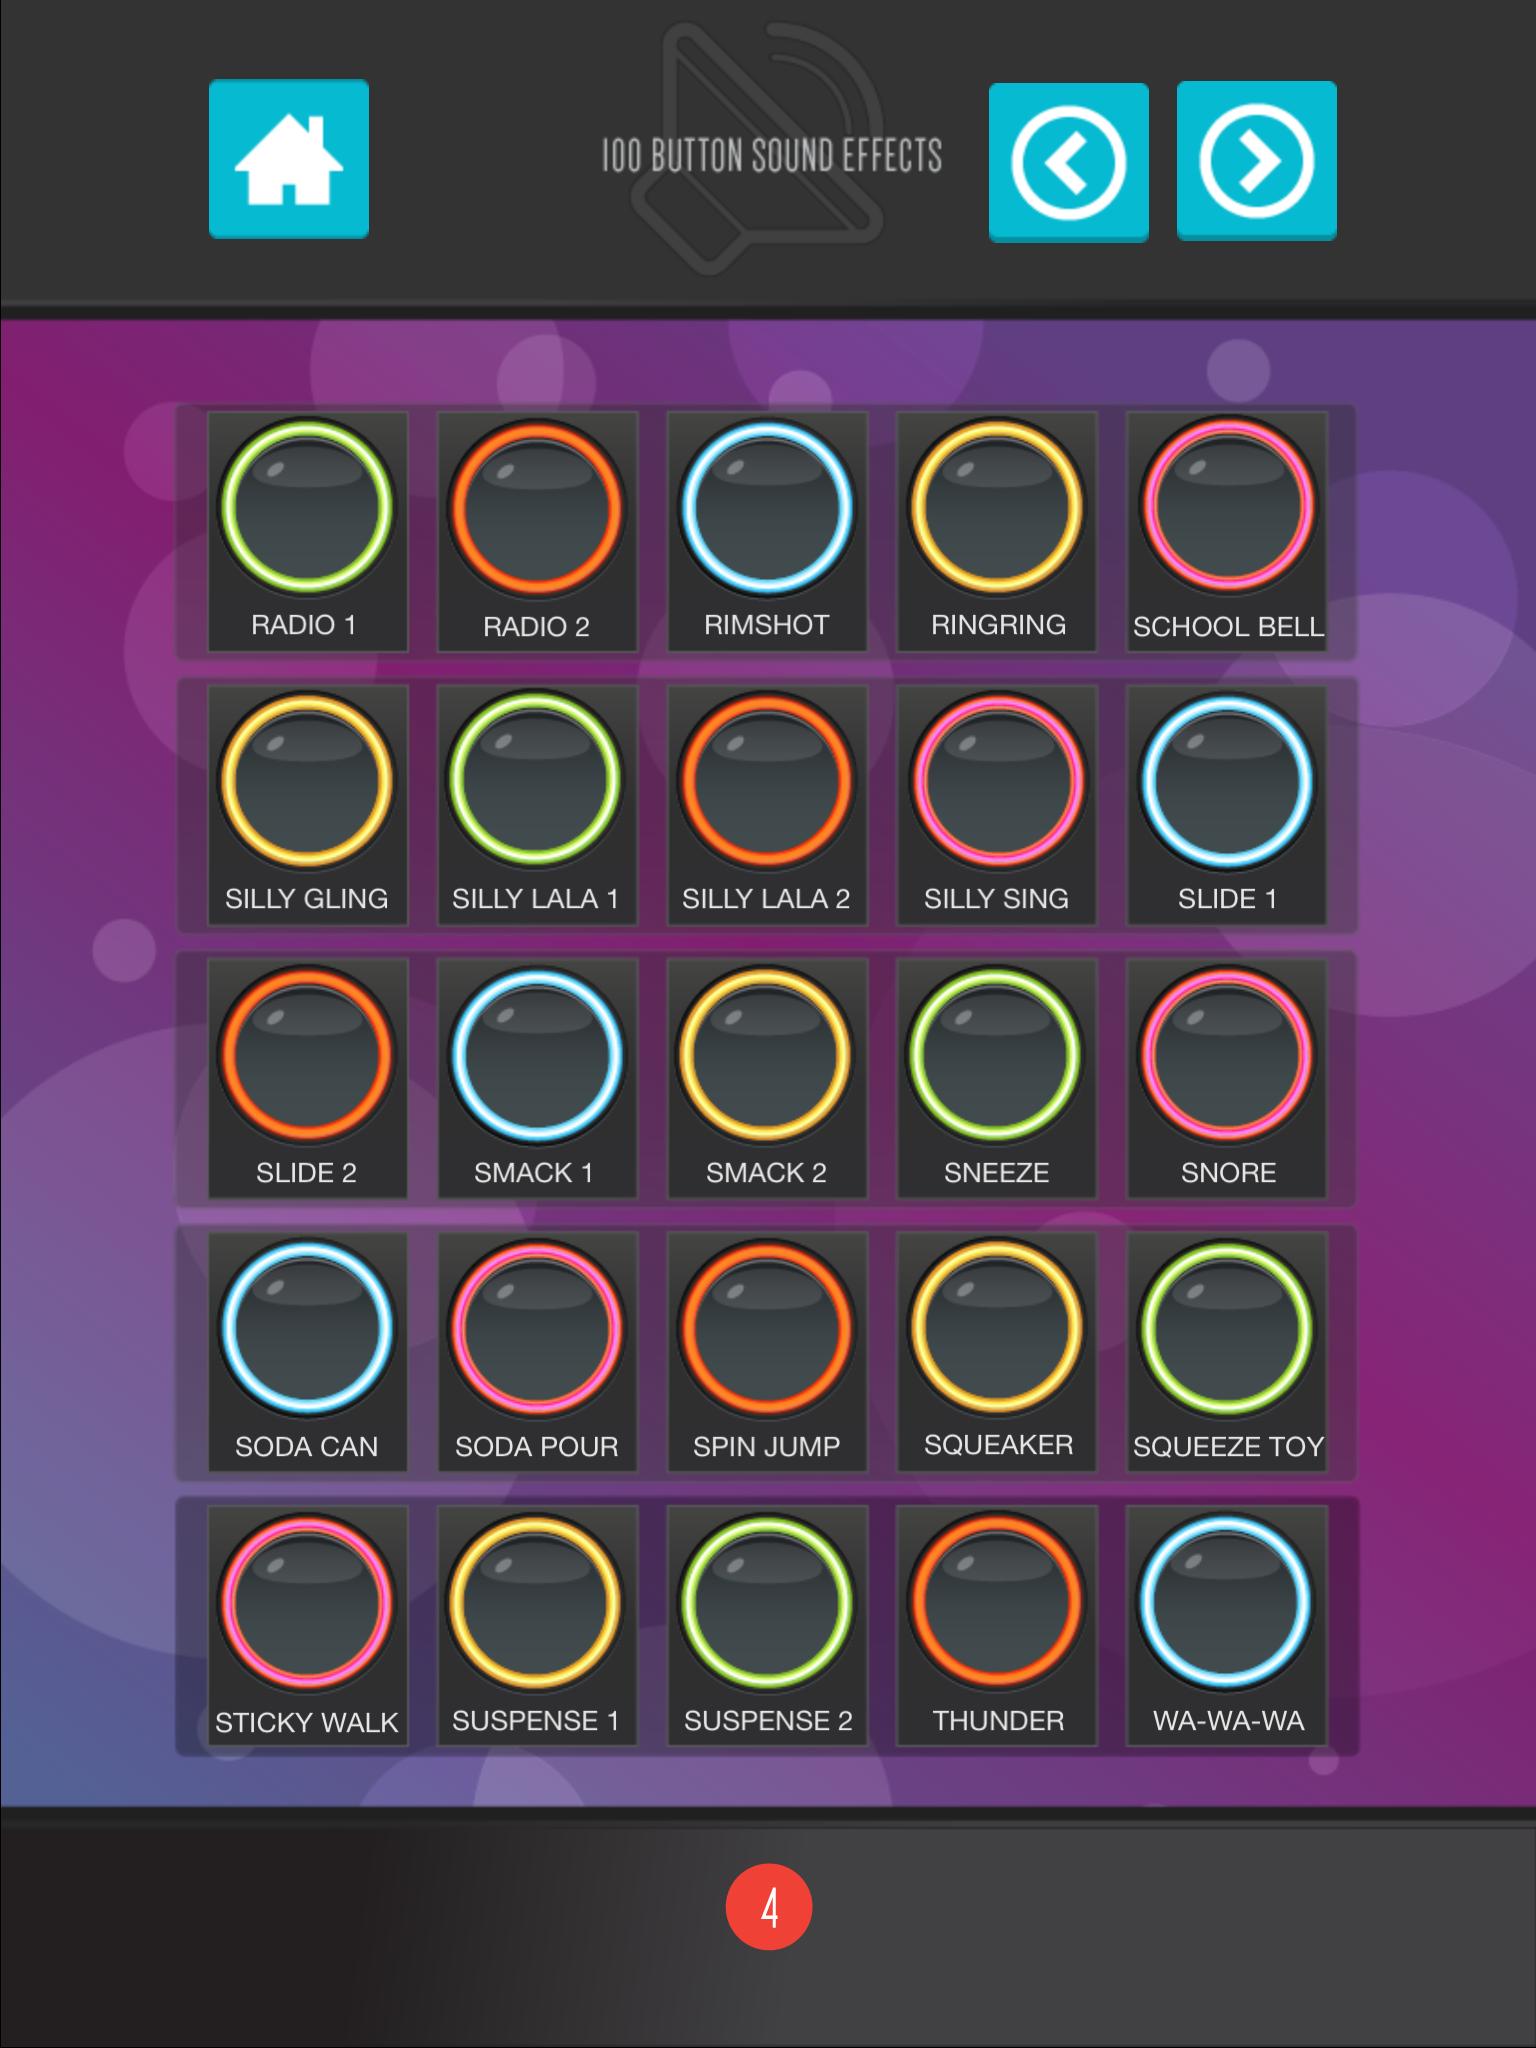 100 Button Sound Effects for Android - APK Download